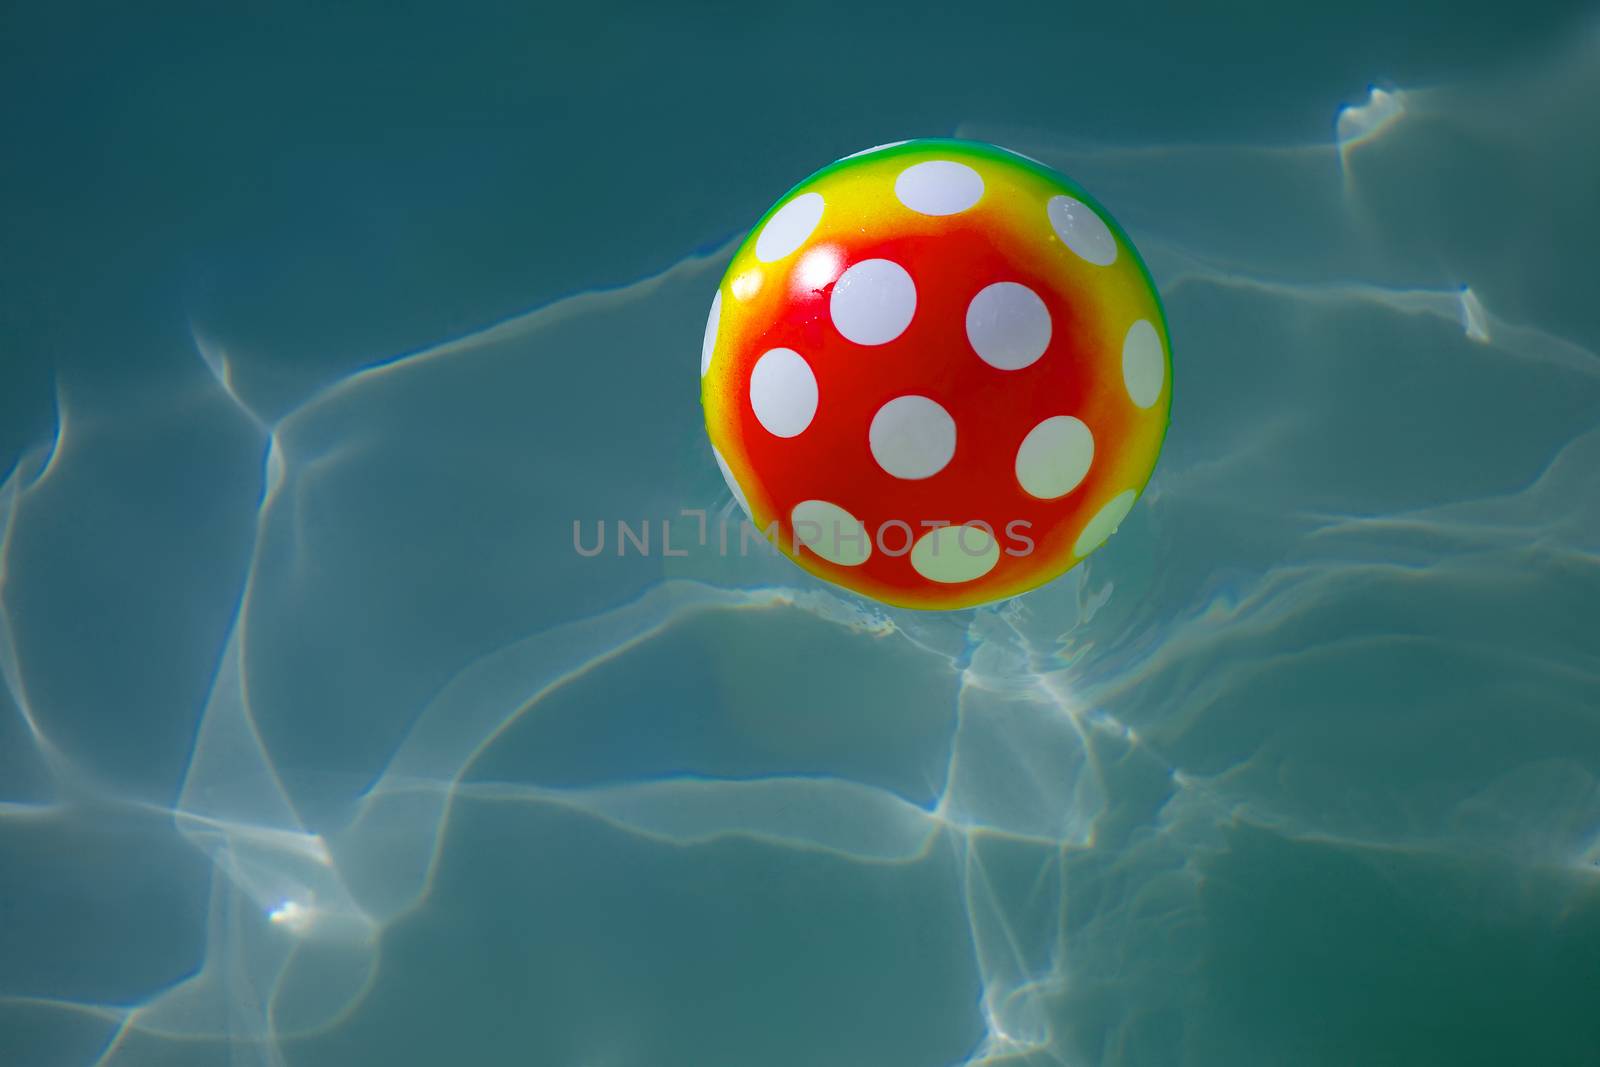 Rubber ball with spots in water